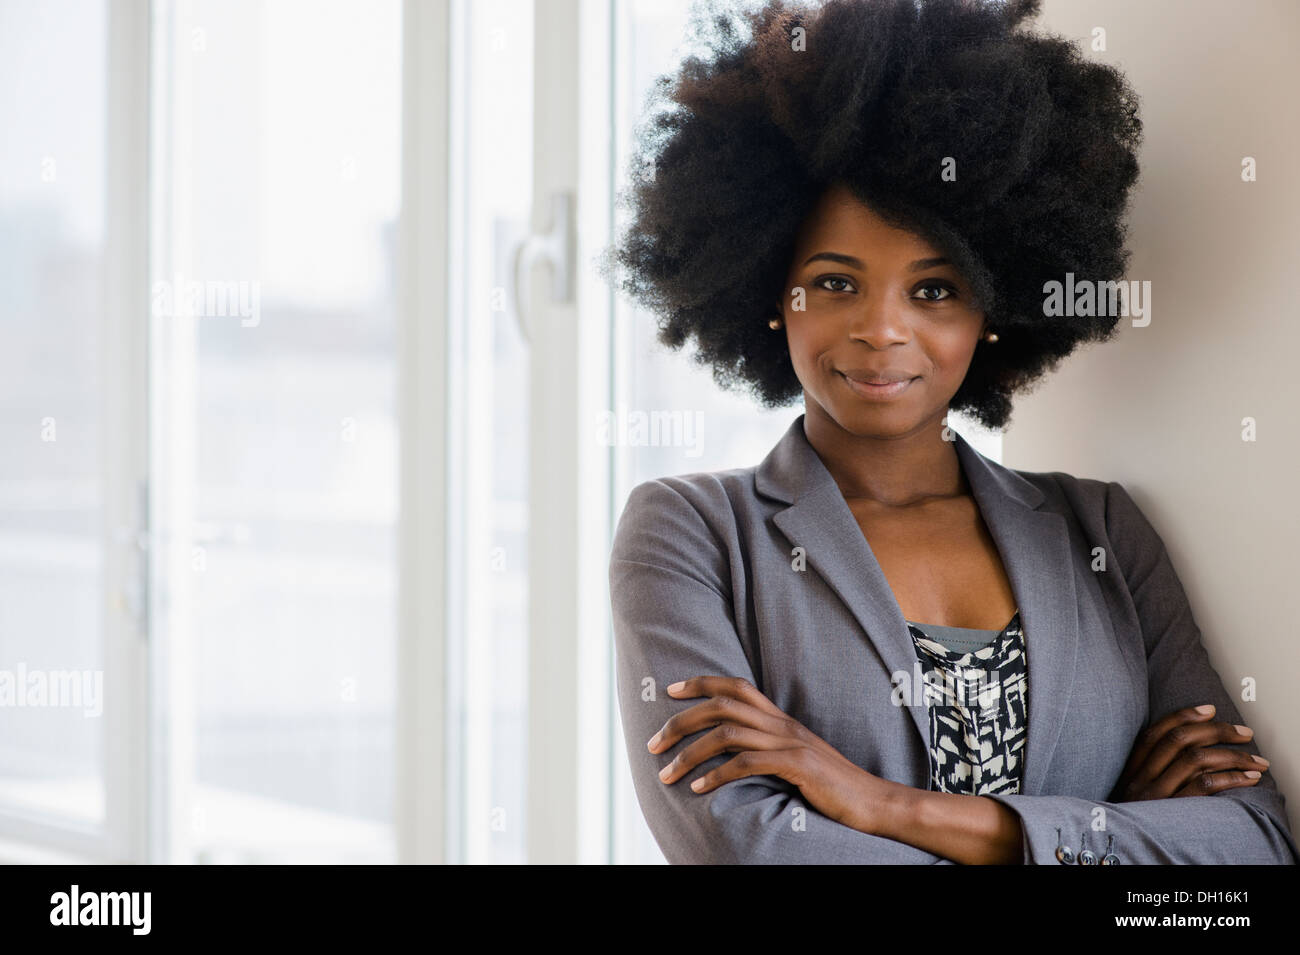 Mixed race businesswoman smiling Stock Photo